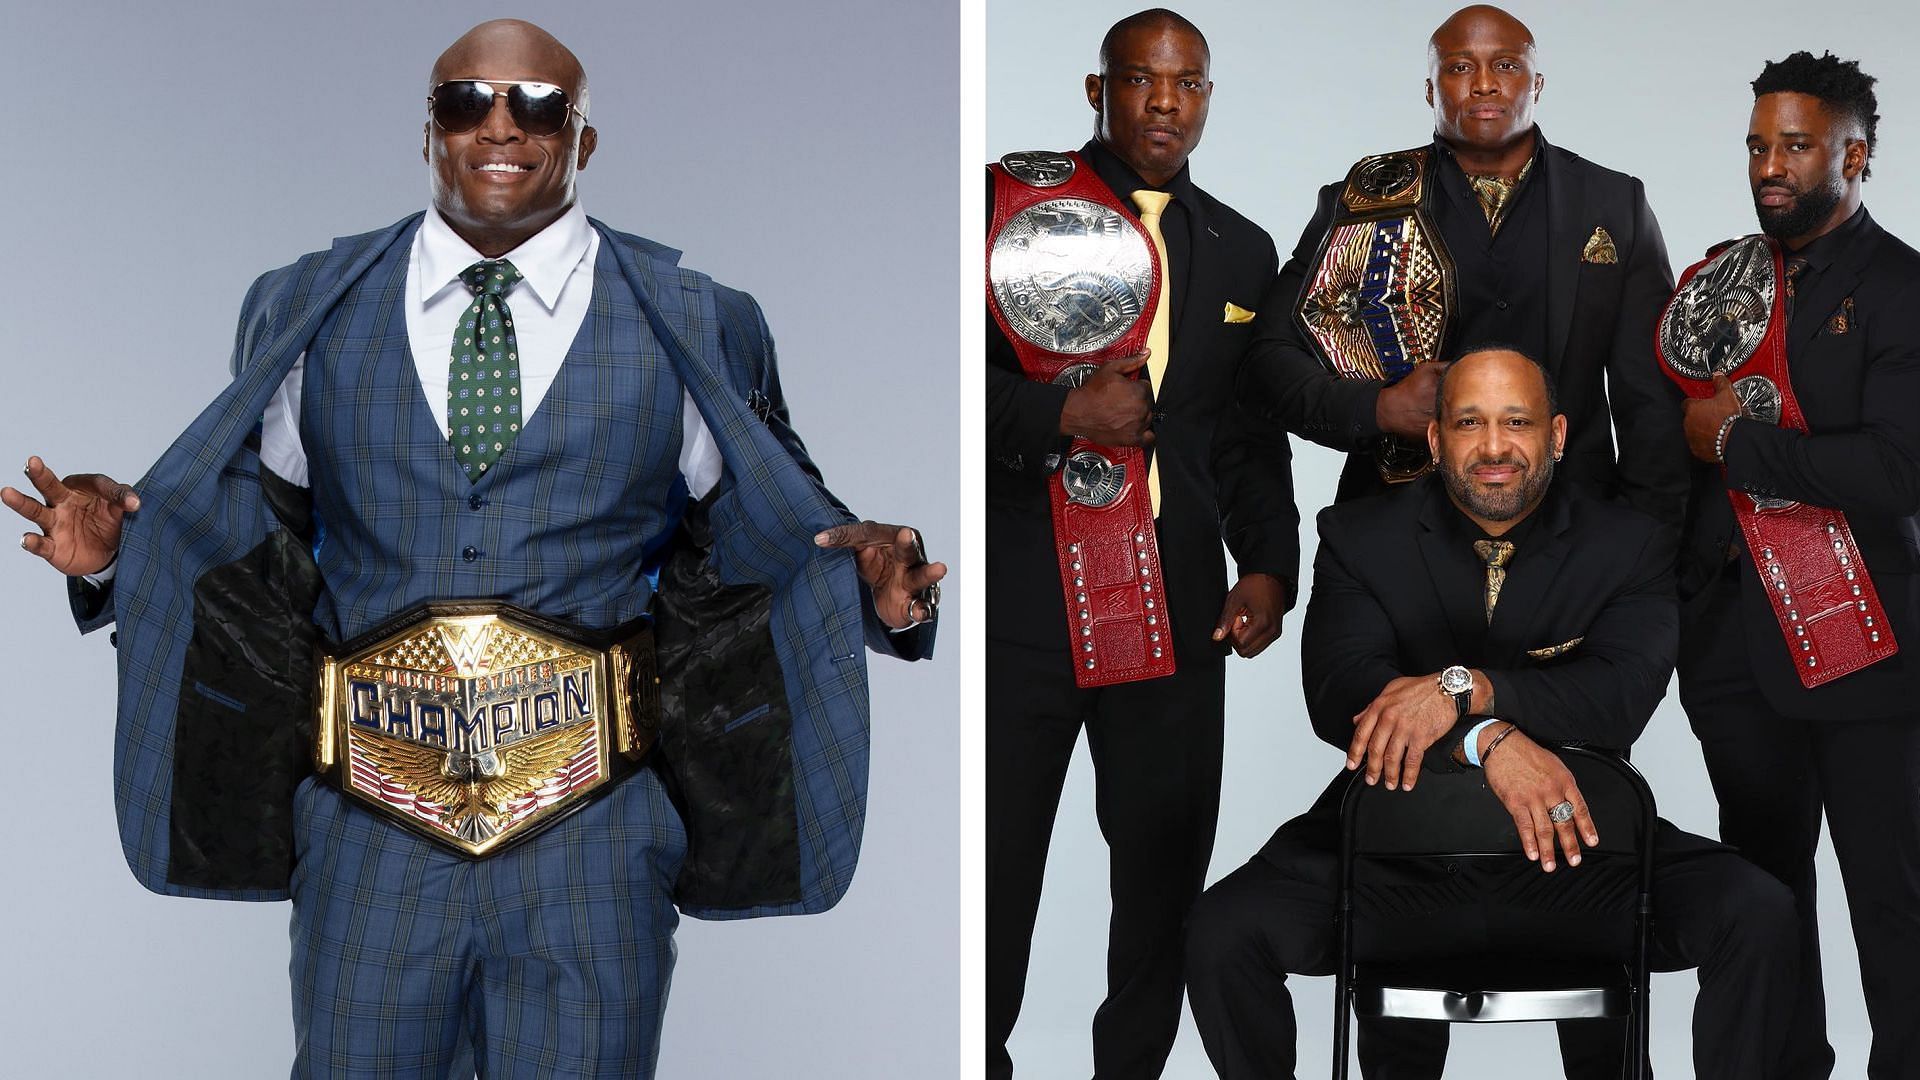 Bobby Lashley and The Hurt Business once dominated WWE